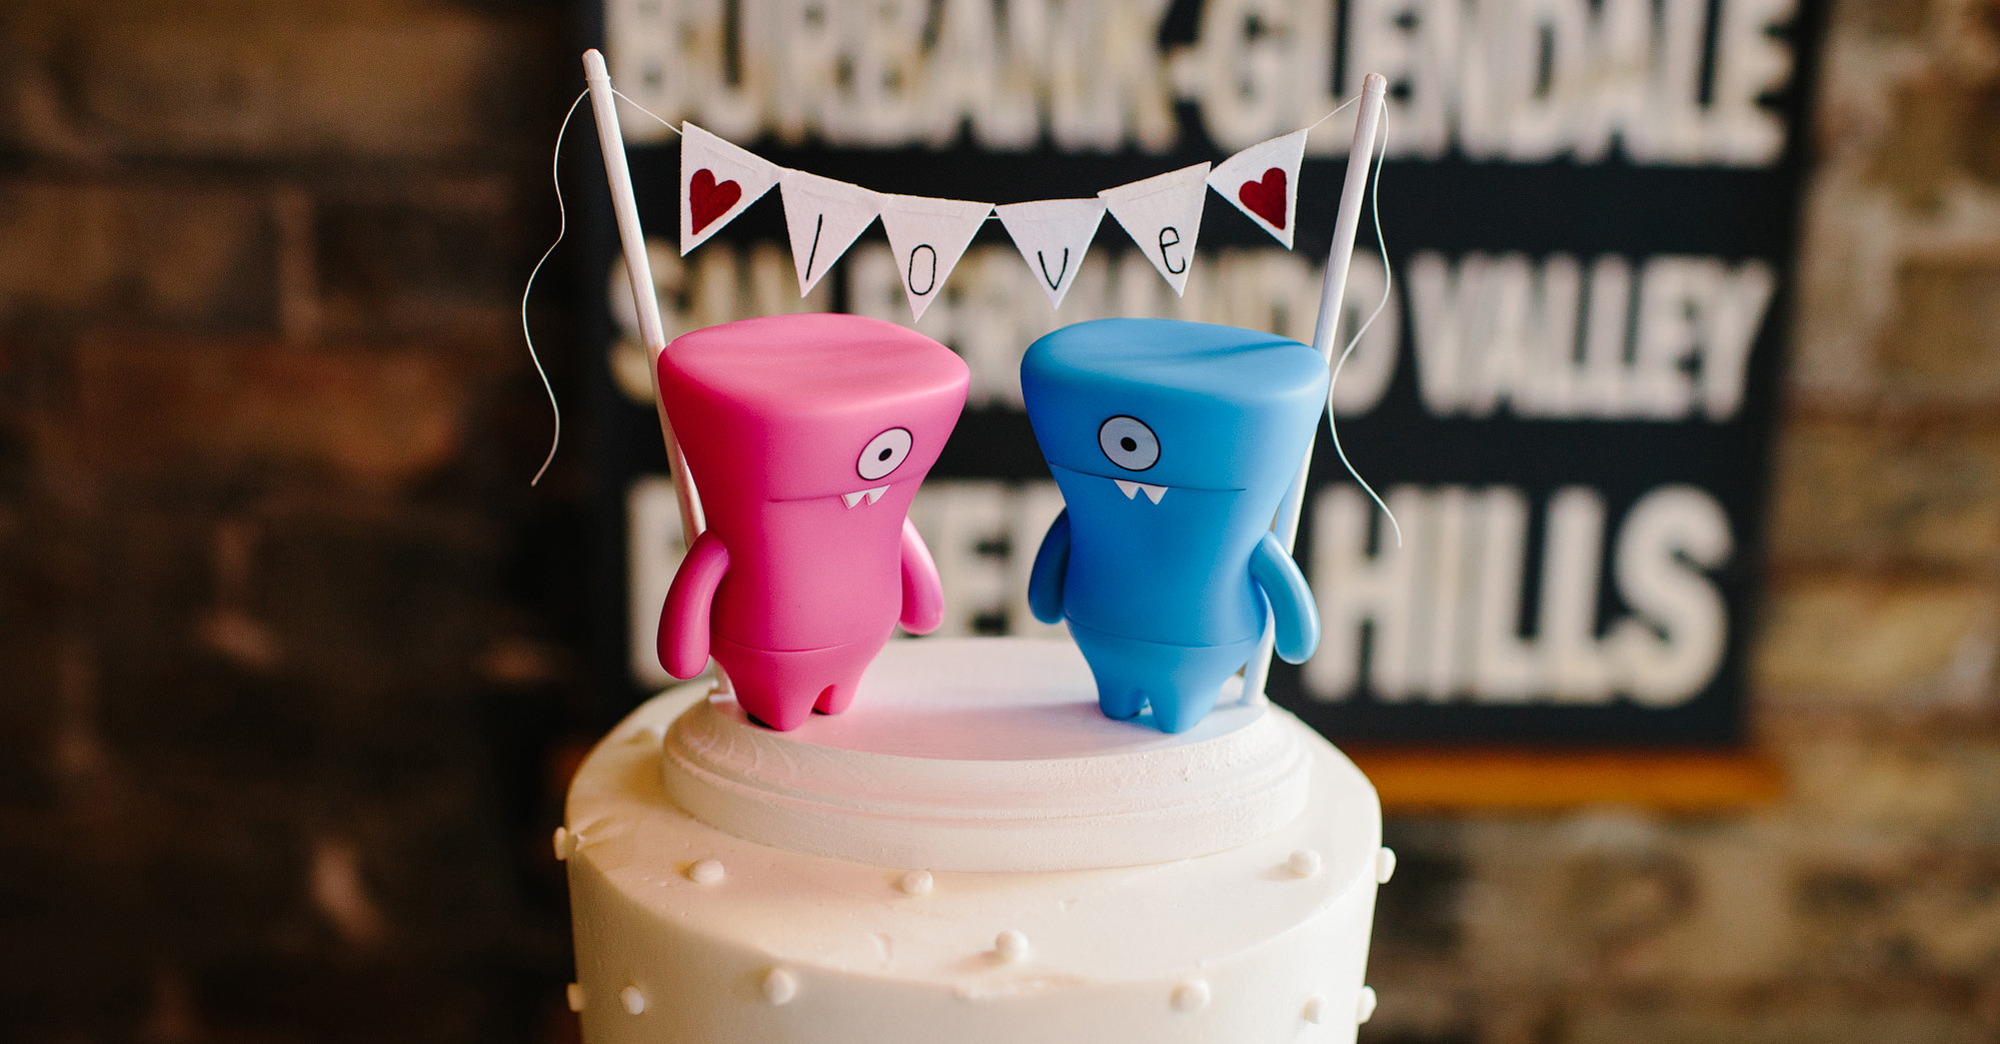 This cake topper just warms our hearts.